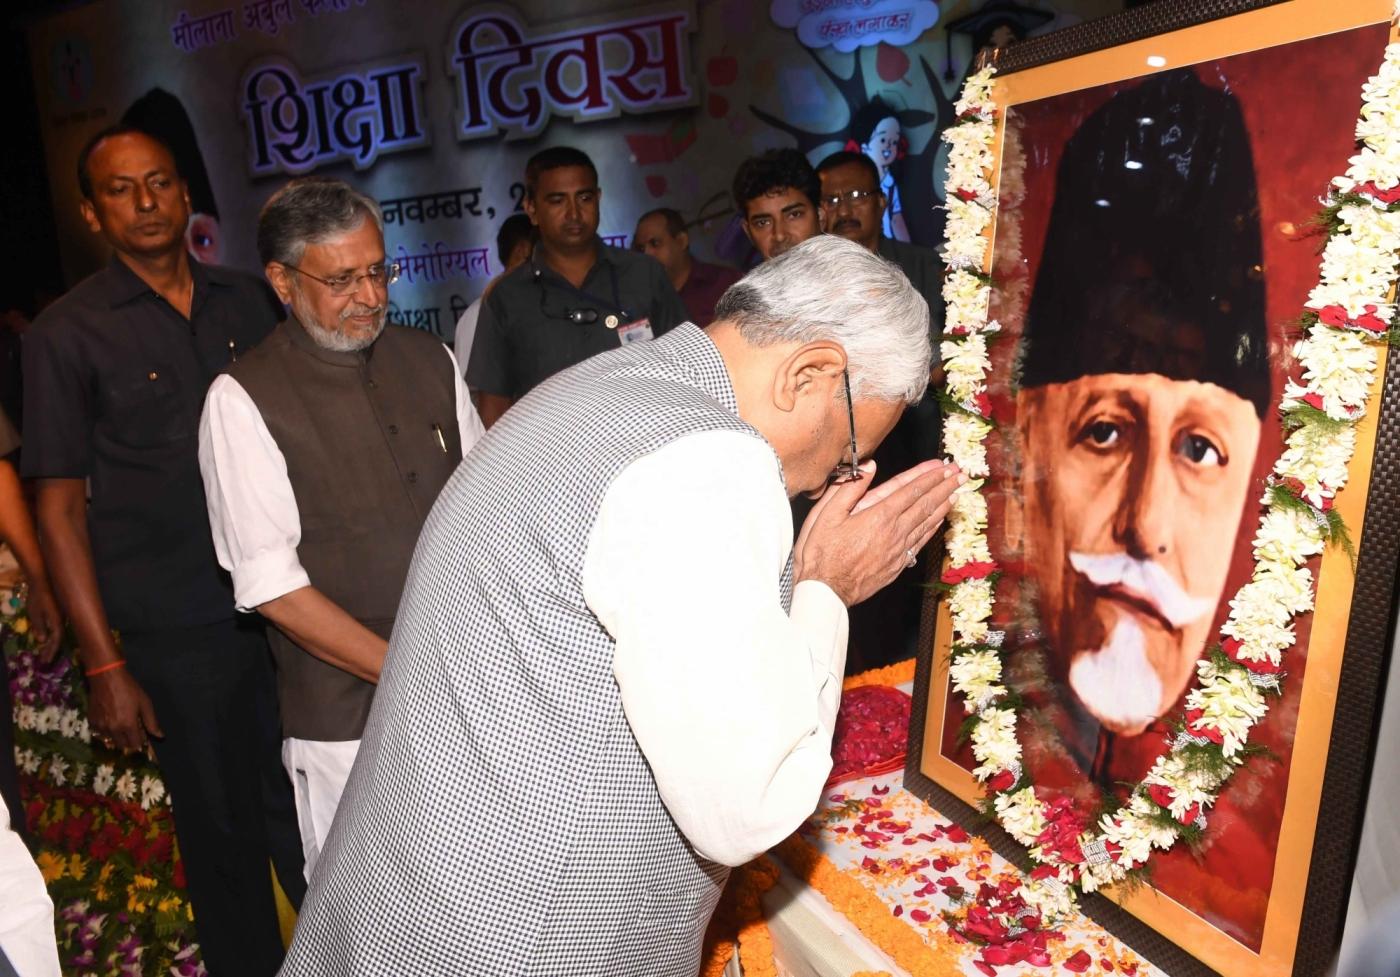 Patna: Bihar Chief Minister Nitish Kumar, accompanied by Deputy Chief Minister Sushil Kumar Modi, pay tributes to Maulana Abul Kalam Azad during a programme organised on his 130th birth anniversary, in Patna on Nov 11, 2018. The day is celebrated as National Education Day in commemoration of Maulana Azad, who was Independent India's first Education Minister and a celebrated scholar. (Photo: IANS) by .